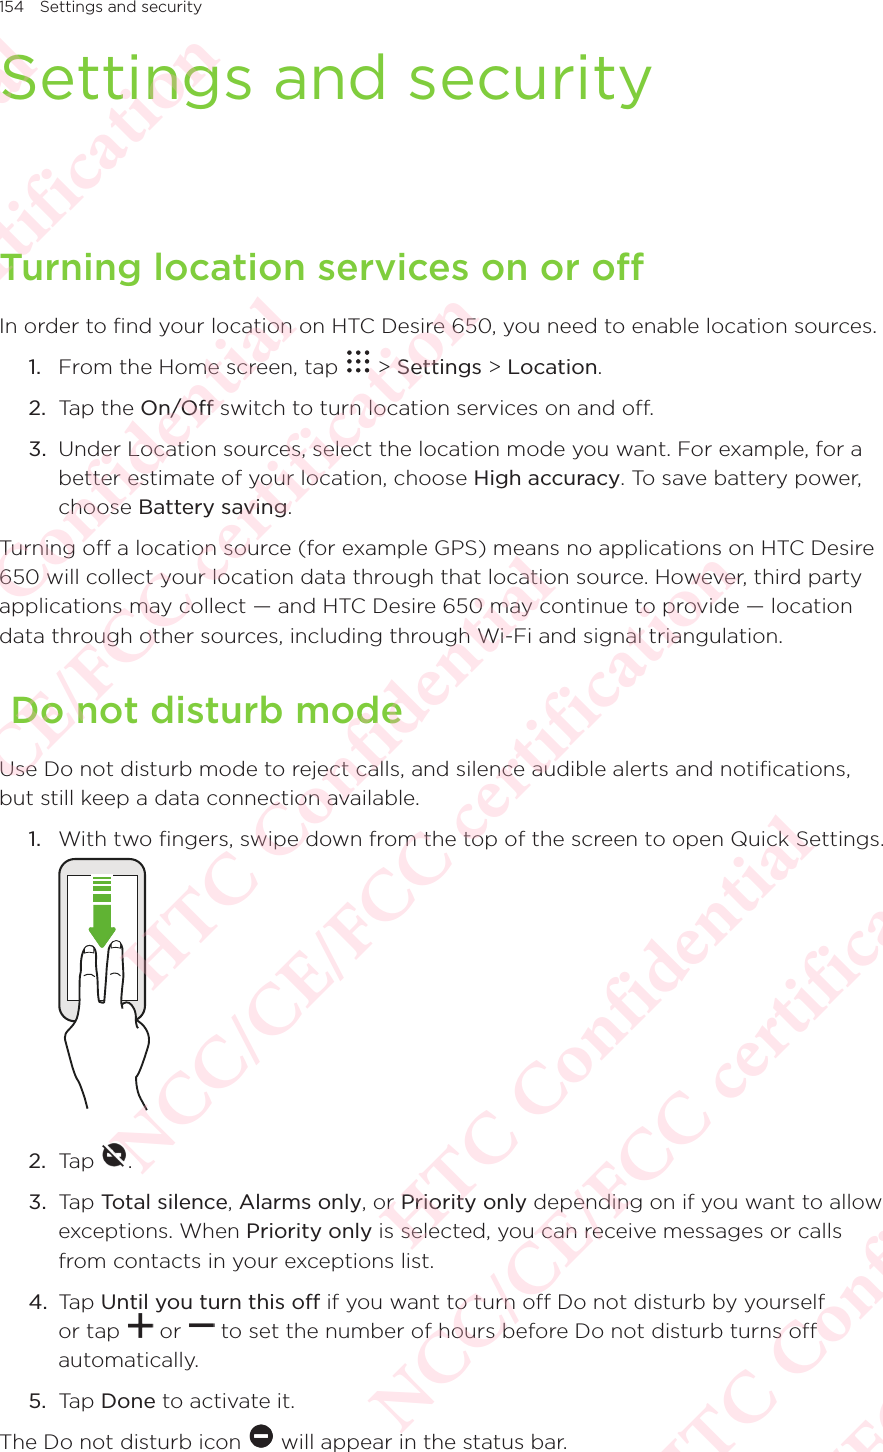 154 Settings and securitySettings and securityTurning location services on or offIn order to find your location on HTC Desire 650, you need to enable location sources. 1.  From the Home screen, tap   &gt; Settings &gt; Location. 2.  Tap the On/Off switch to turn location services on and off. 3.  Under Location sources, select the location mode you want. For example, for a better estimate of your location, choose High accuracy. To save battery power, choose Battery saving. Turning off a location source (for example GPS) means no applications on HTC Desire 650 will collect your location data through that location source. However, third party applications may collect — and HTC Desire 650 may continue to provide — location data through other sources, including through Wi-Fi and signal triangulation.  Do not disturb modeUse Do not disturb mode to reject calls, and silence audible alerts and notifications, but still keep a data connection available. 1.  With two fingers, swipe down from the top of the screen to open Quick Settings.  2.  Tap  . 3.  Tap Total silence, Alarms only, or Priority only depending on if you want to allow exceptions. When Priority only is selected, you can receive messages or calls from contacts in your exceptions list.4.  Tap Until you turn this off if you want to turn off Do not disturb by yourself or tap   or   to set the number of hours before Do not disturb turns off automatically. 5.  Tap Done to activate it. The Do not disturb icon   will appear in the status bar. HTC Confidential NCC/CE/FCC certification  HTC Confidential NCC/CE/FCC certification  HTC Confidential NCC/CE/FCC certification  HTC Confidential NCC/CE/FCC certification  HTC Confidential NCC/CE/FCC certification